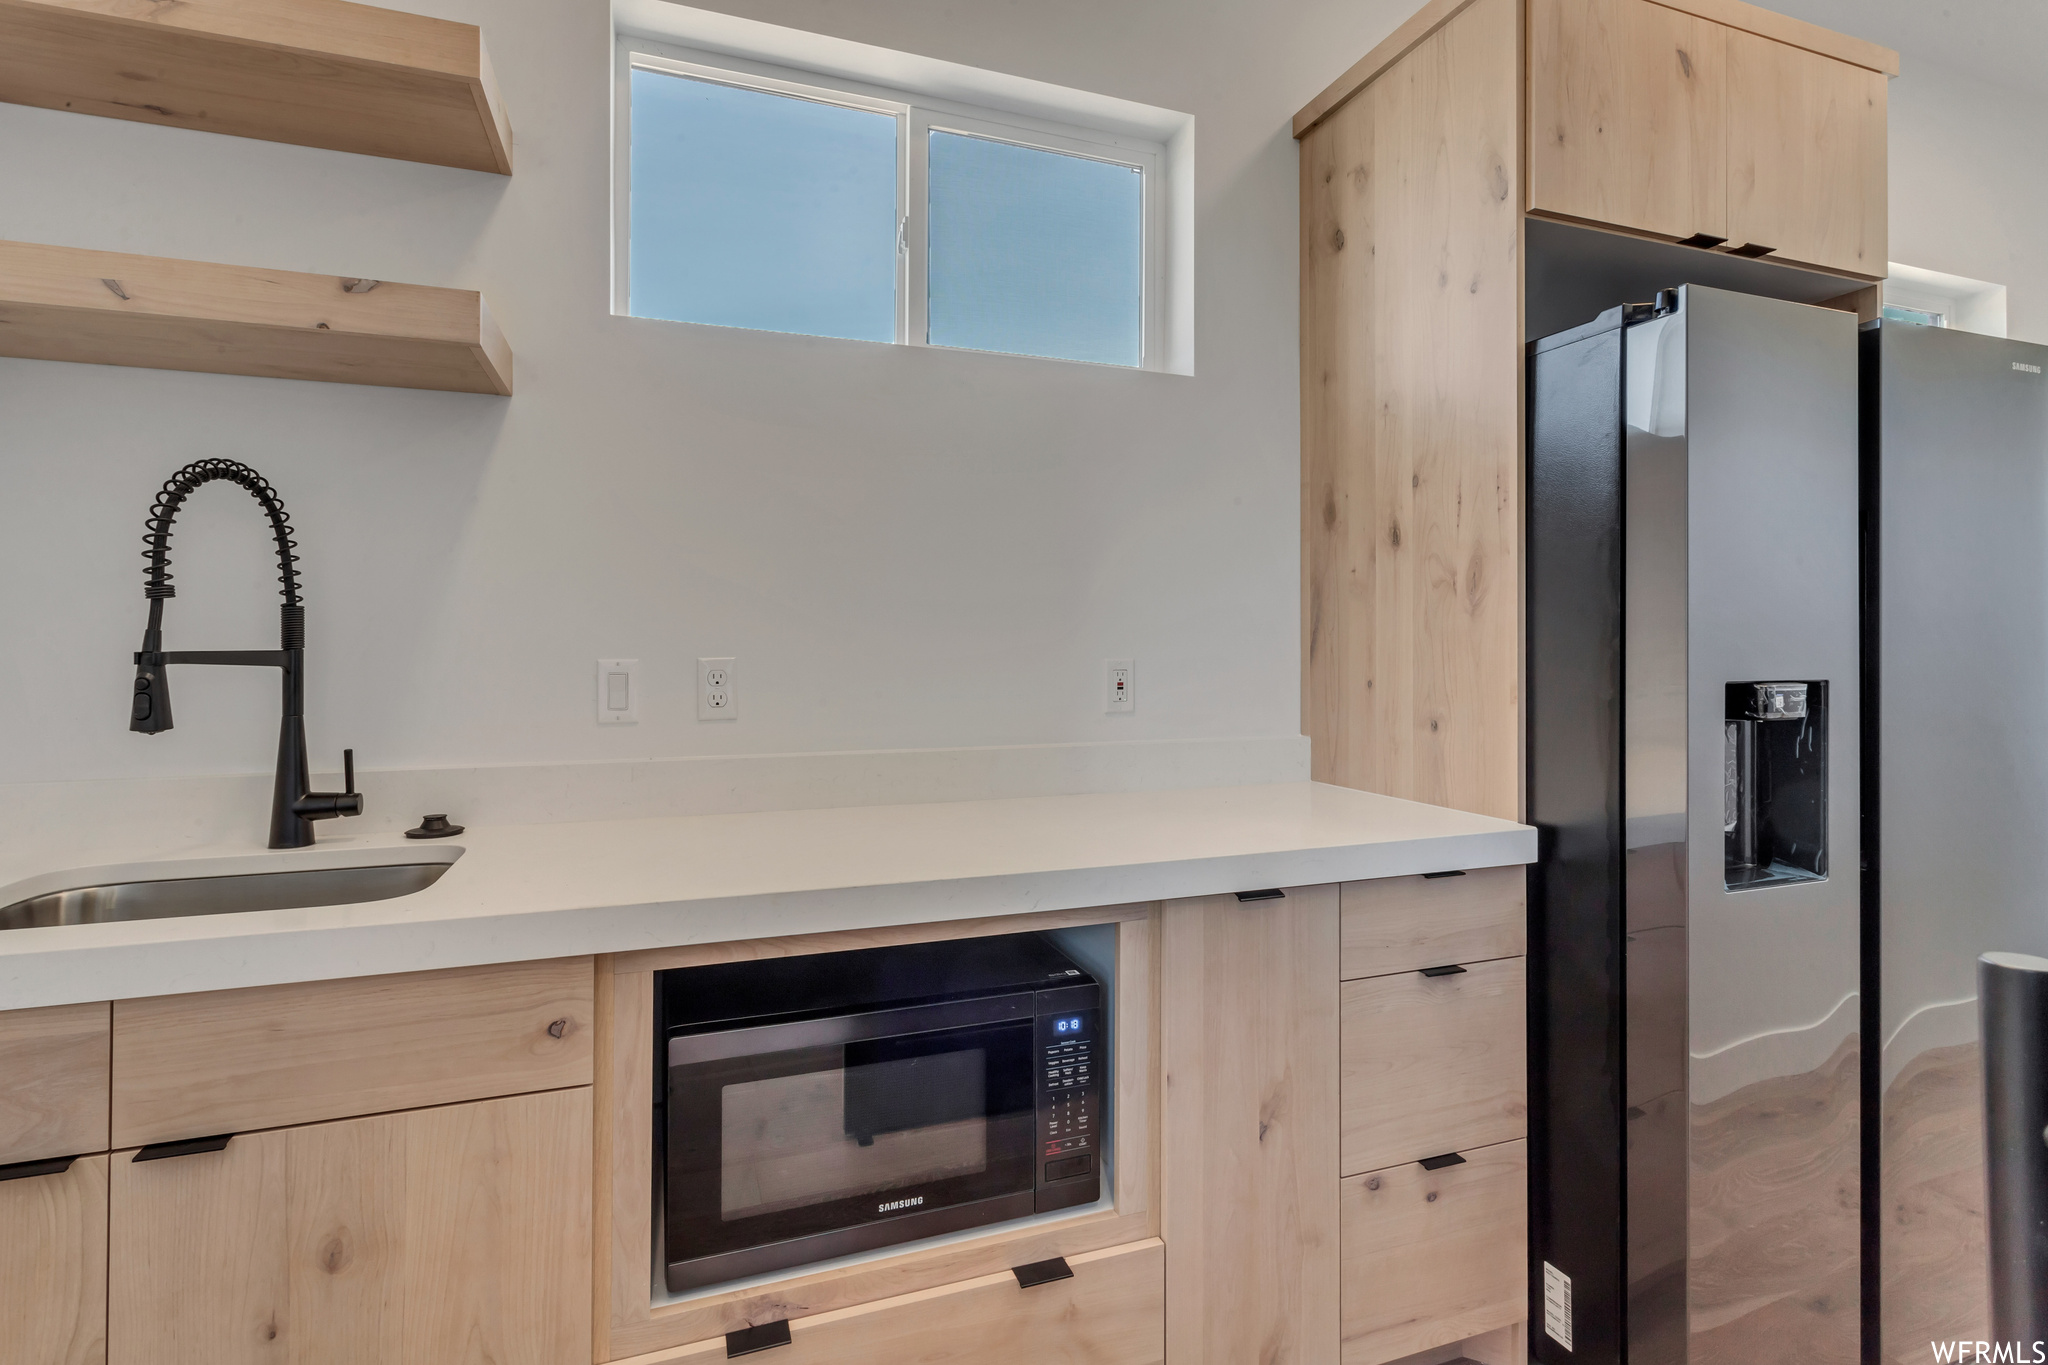 Pantry sink and microwave are included - this owner added an extra fridge to expand their storage options